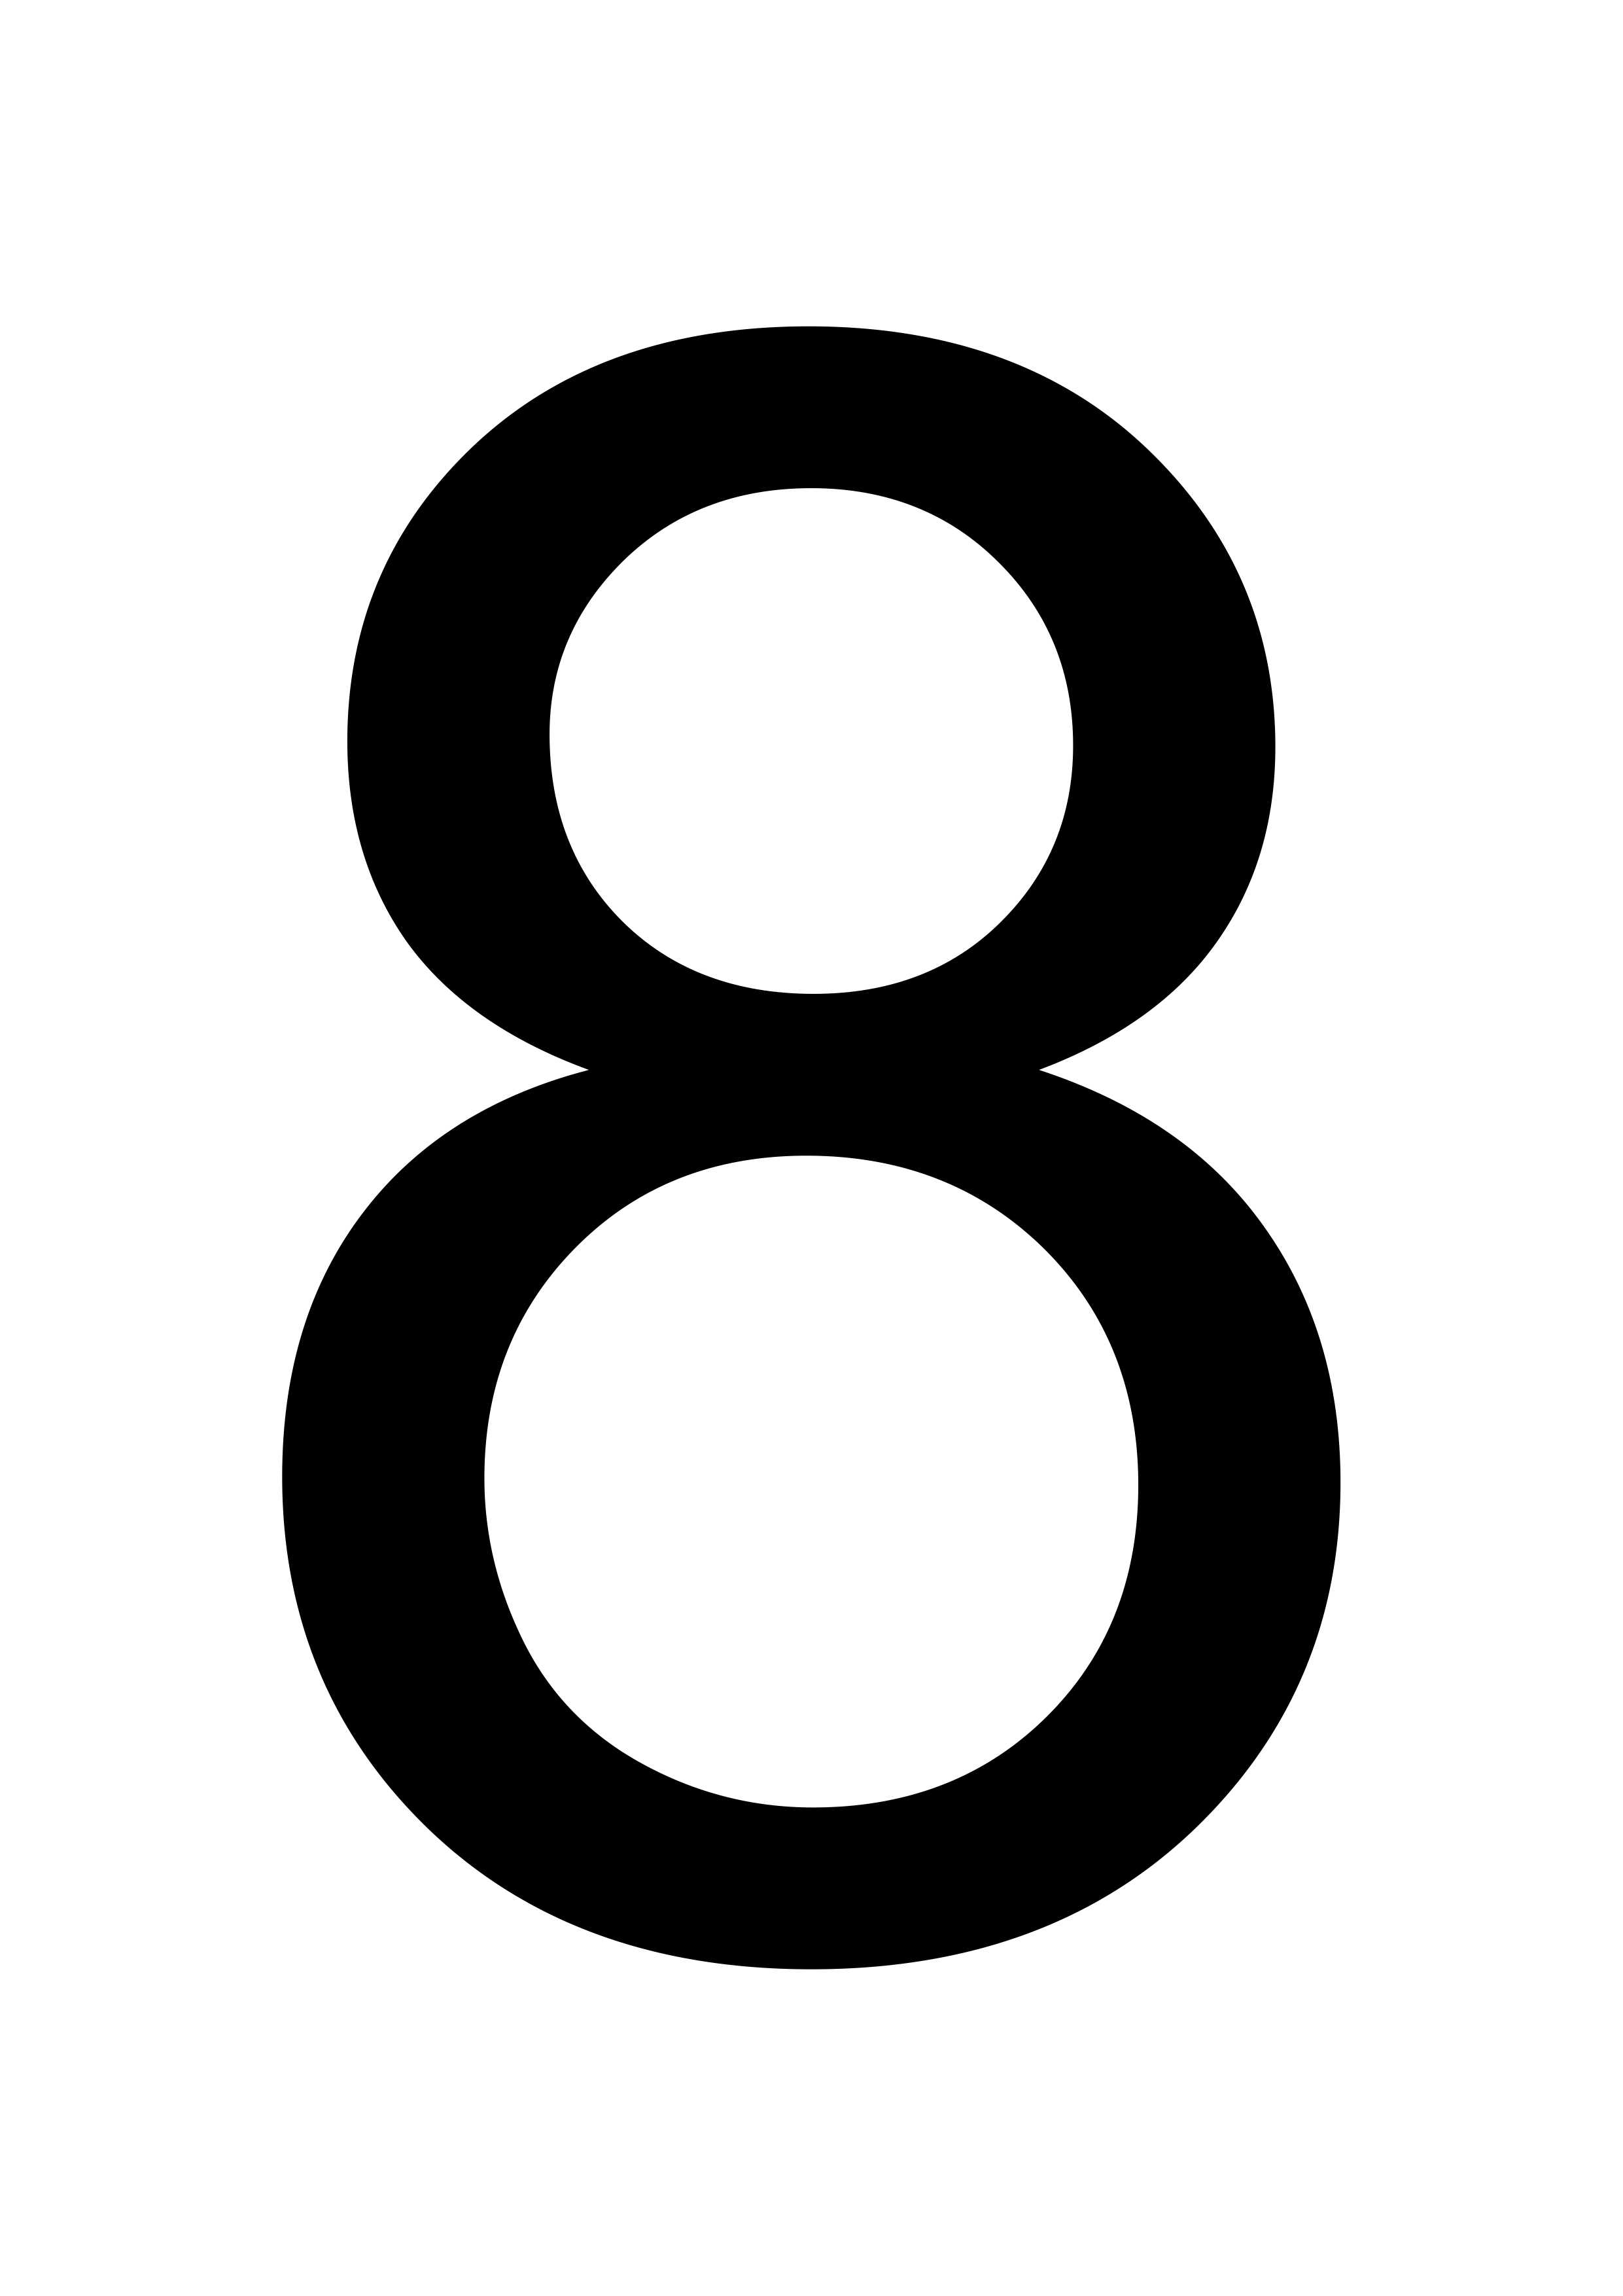  The Significance Of The Number 8 In Chinese Culture Asian Journal USA